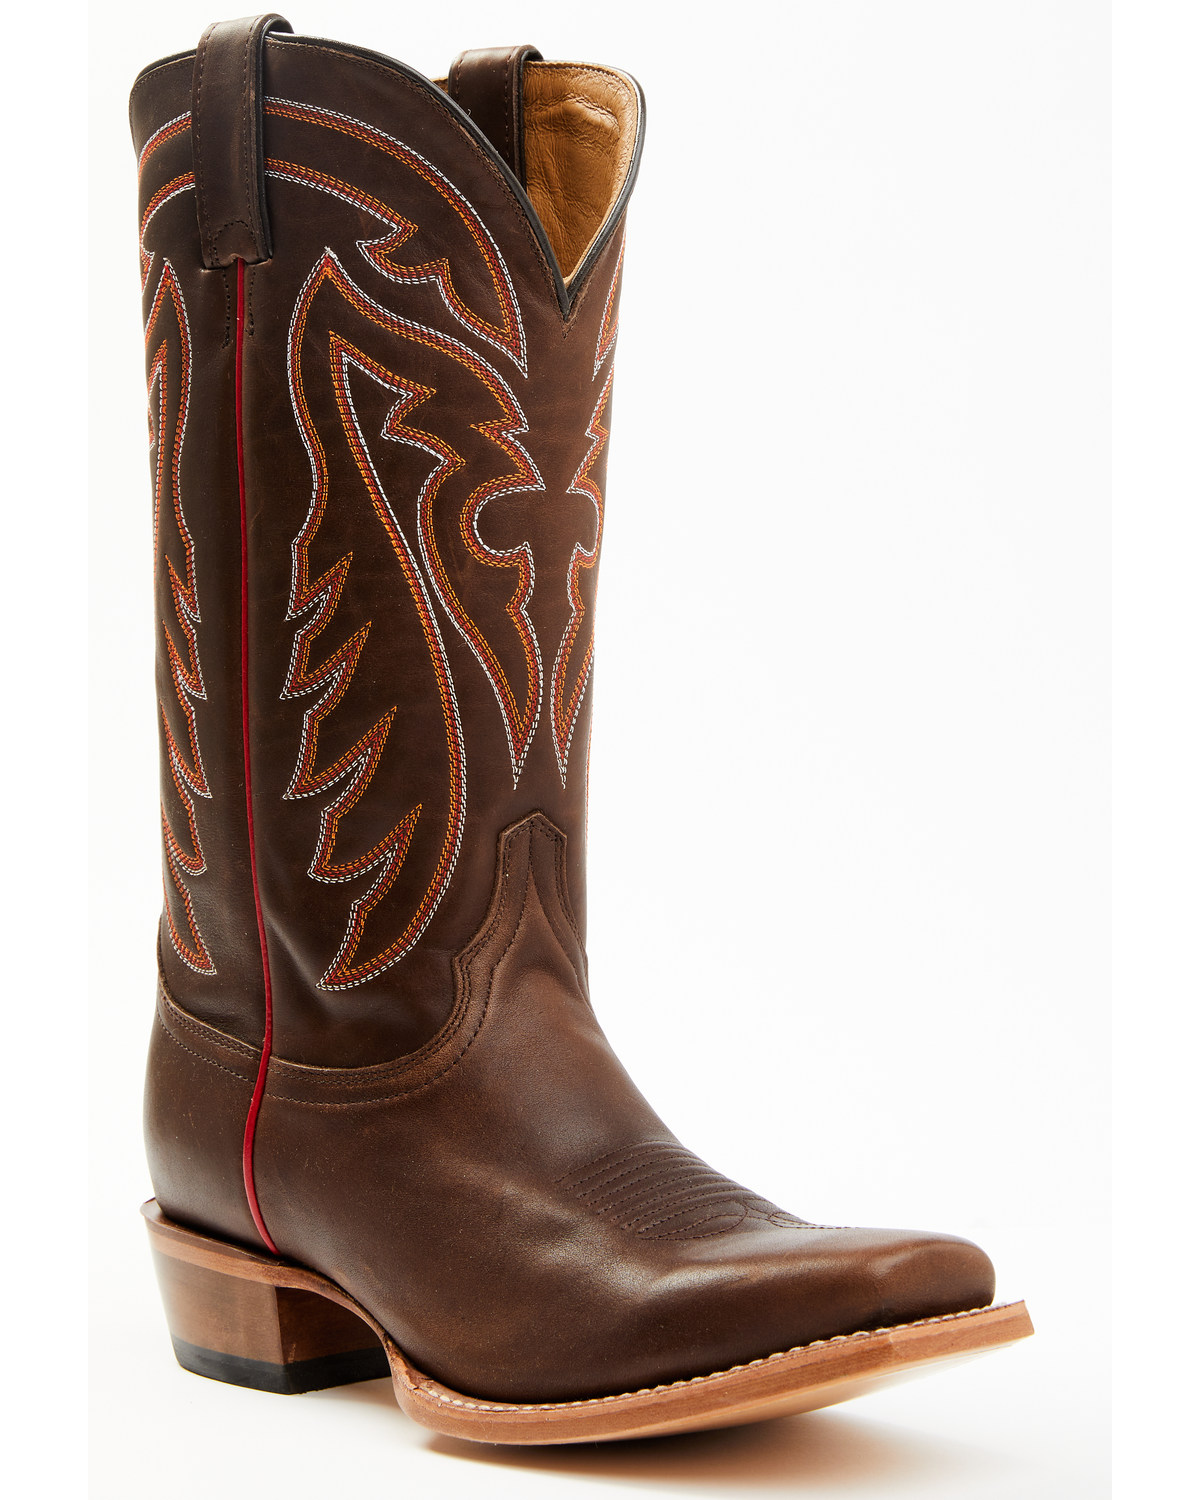 Justin Men's Brindle Western Boots - Square Toe